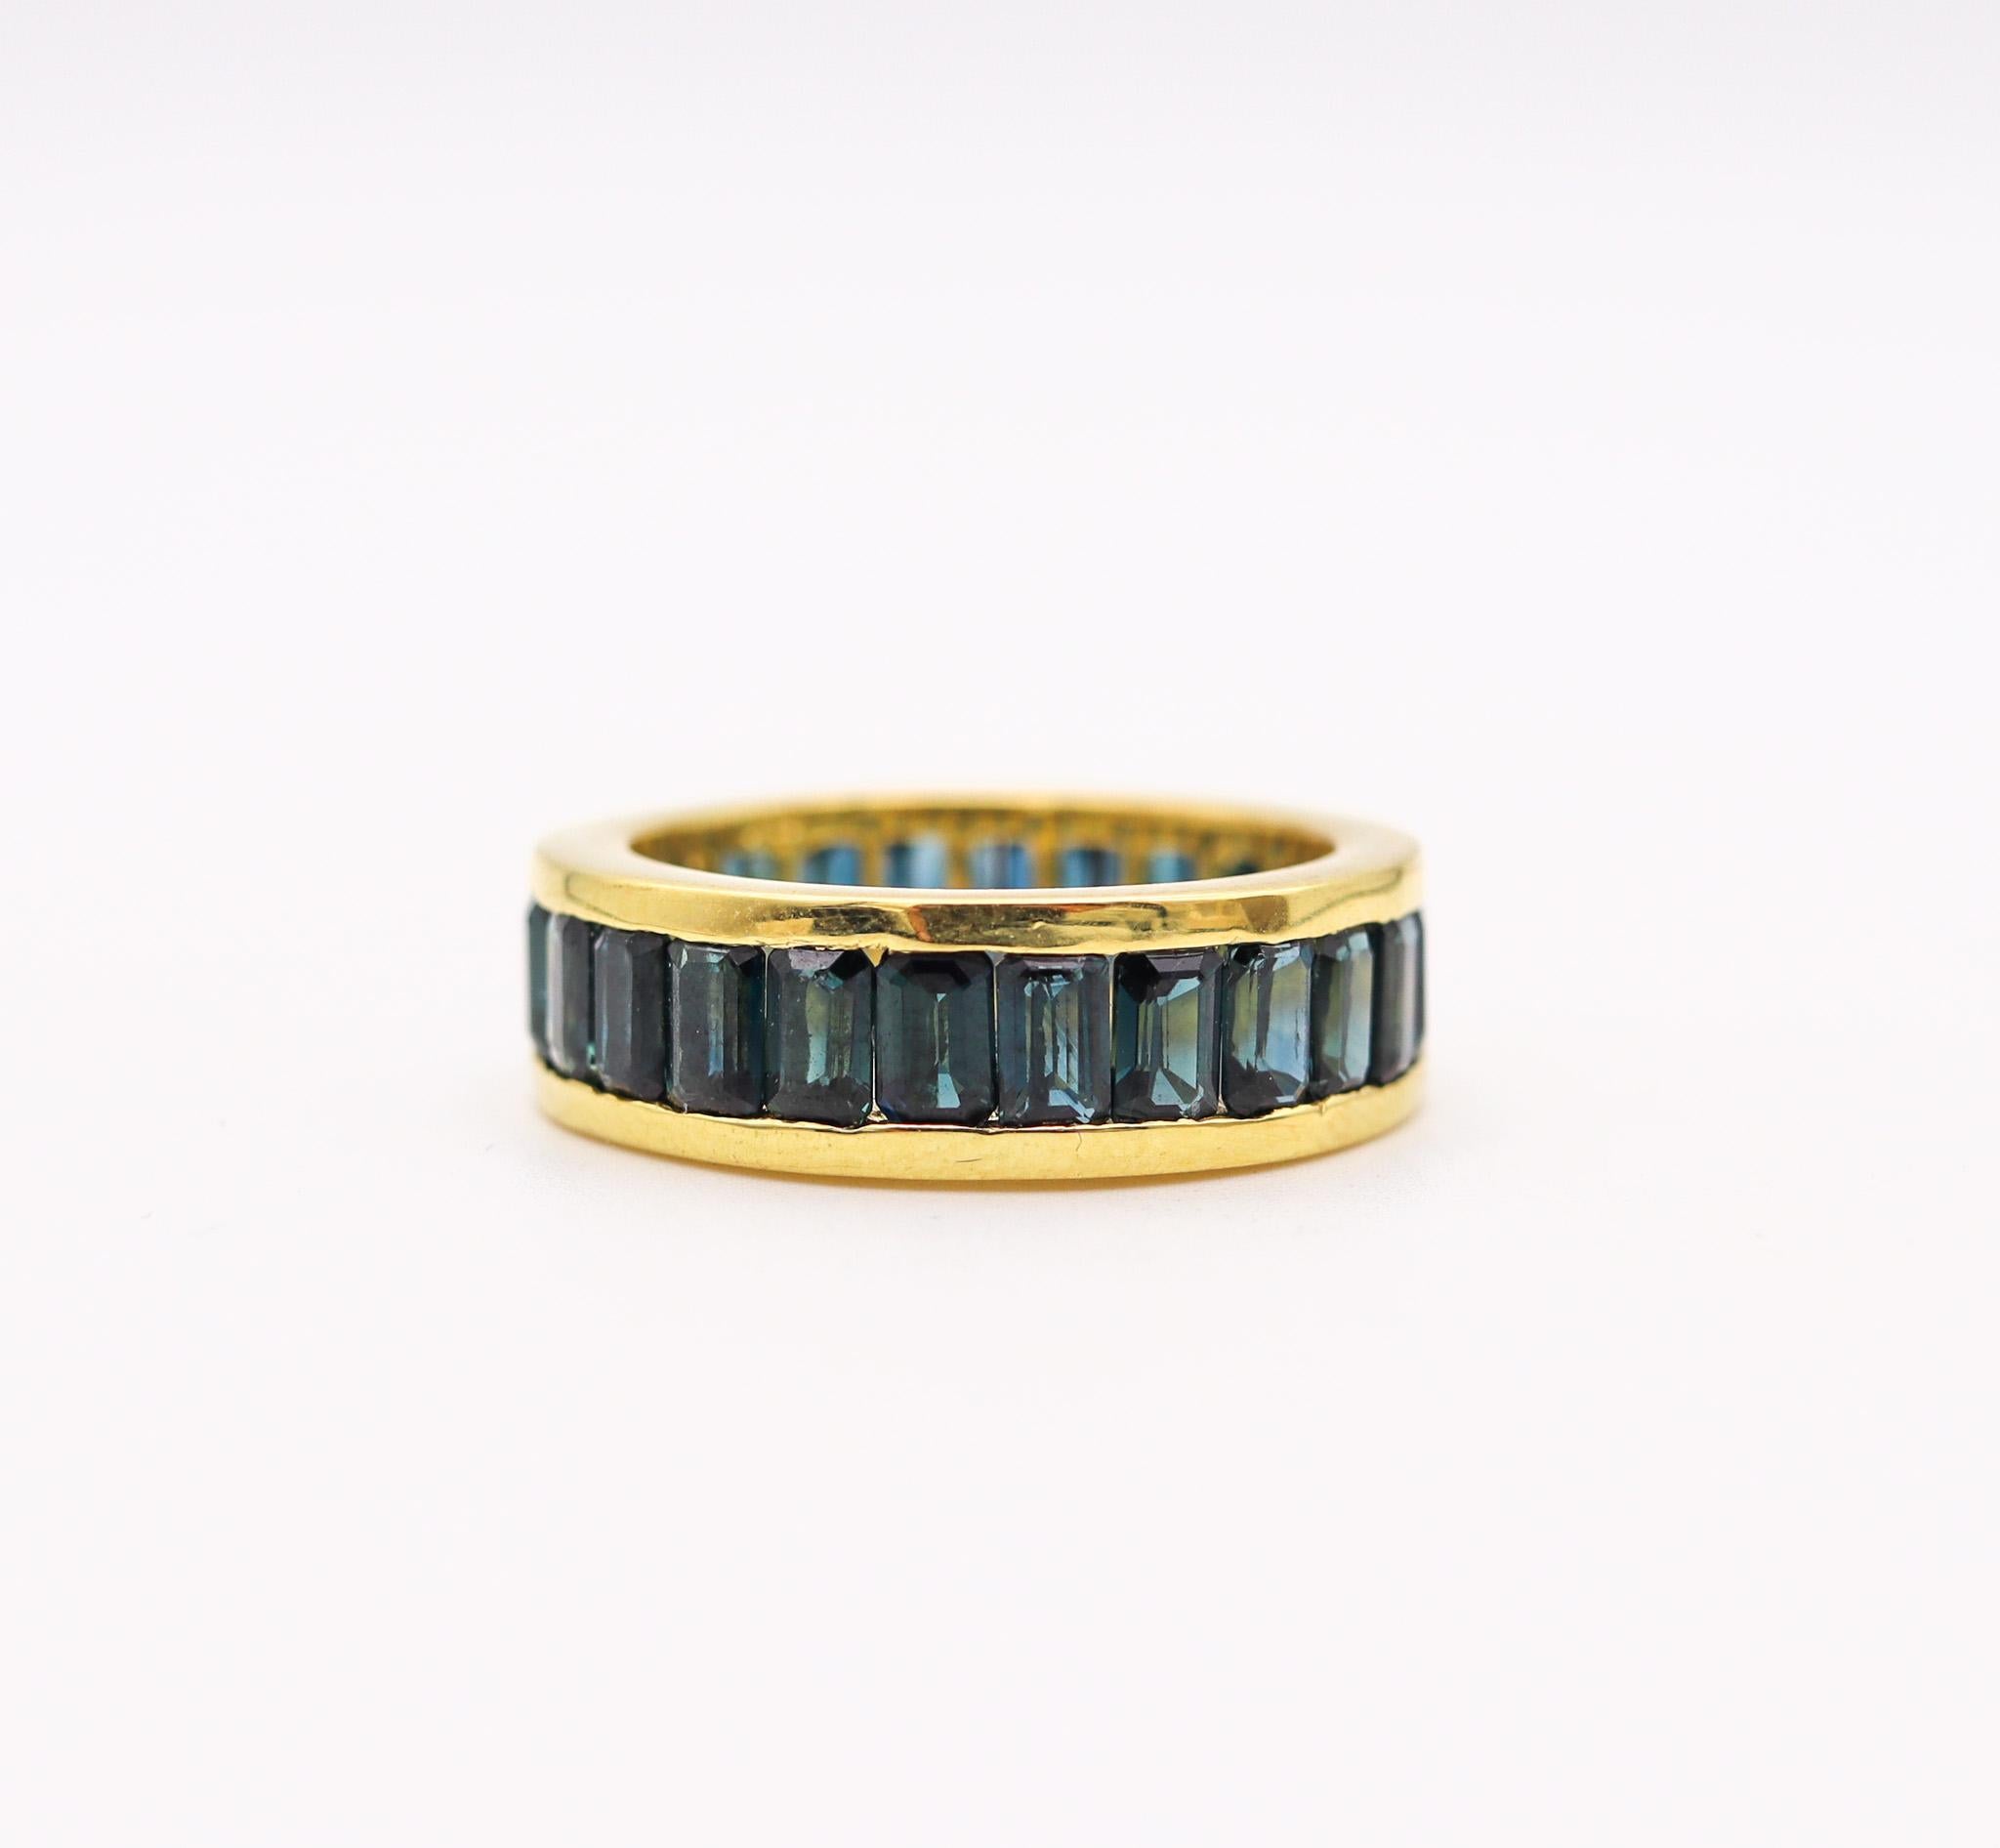 An eternity ring band with Natural Sapphires.

Modern eternity band ring crafted in solid 18 karats white gold, with high polished finish. Designed with a bold and thick look and is mounted in a channel-setting, with 24 calibrated emerald cuts of